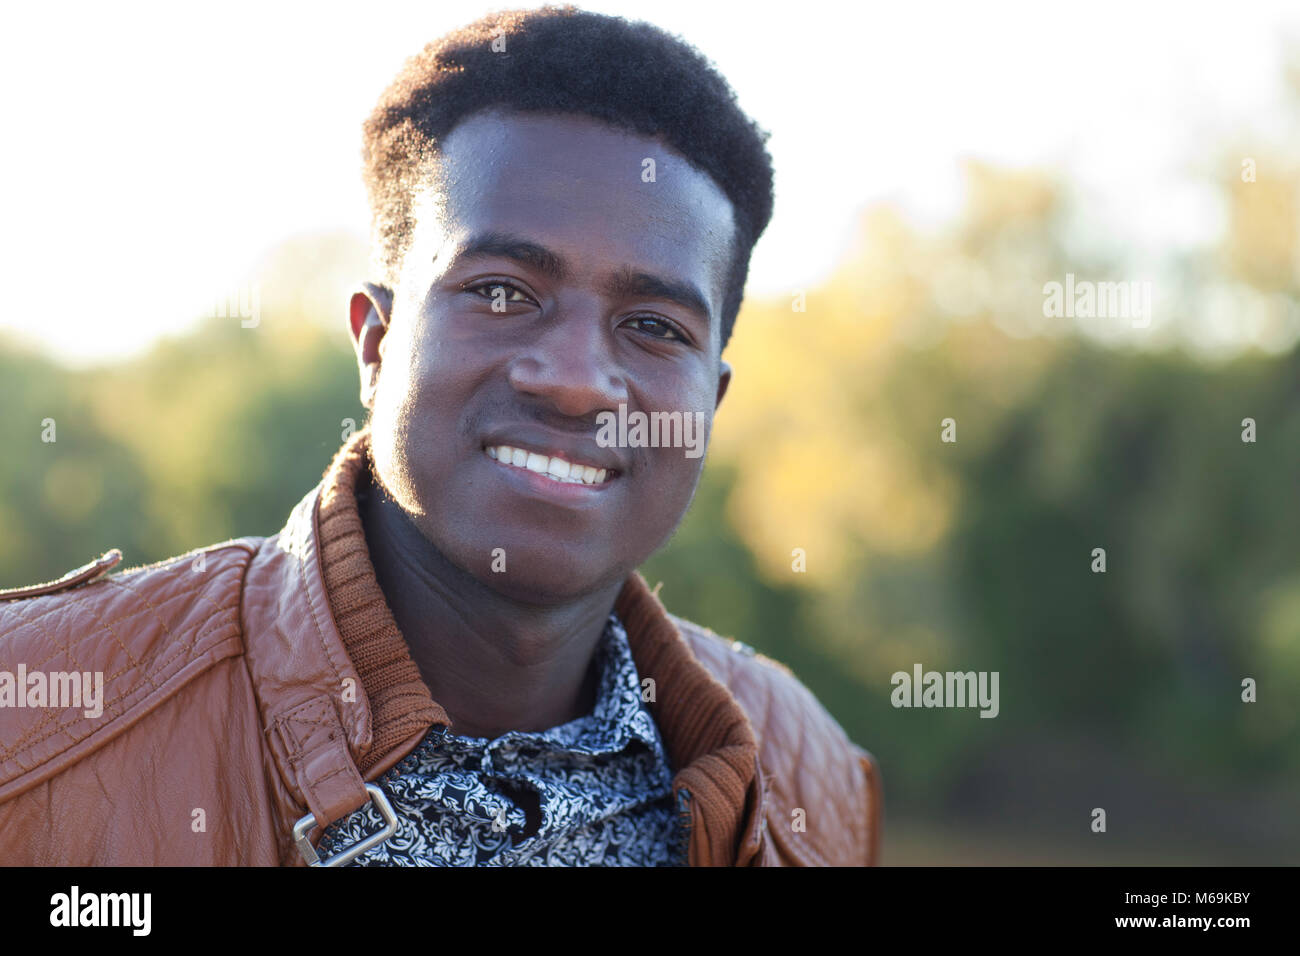 Handsome young black man smiling in front of defocused background Stock Photo